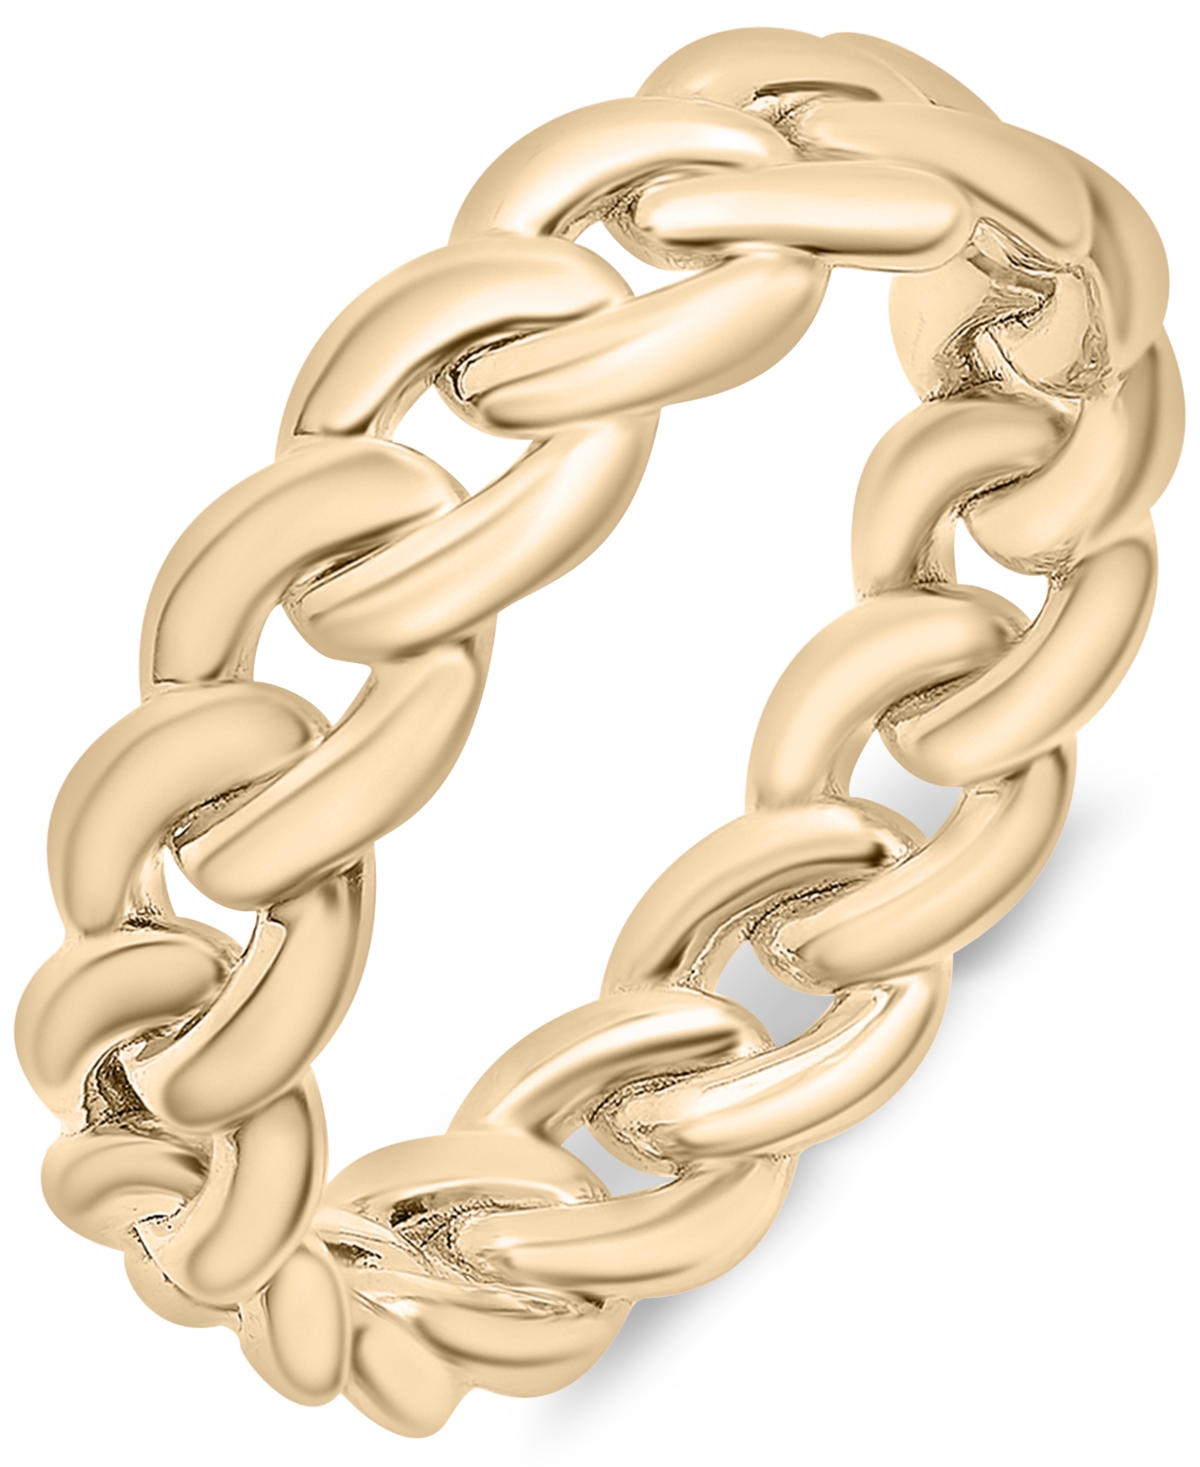 Chain Link Statement Ring in Gold Vermeil, Created for Macy's - Gold Vermeil